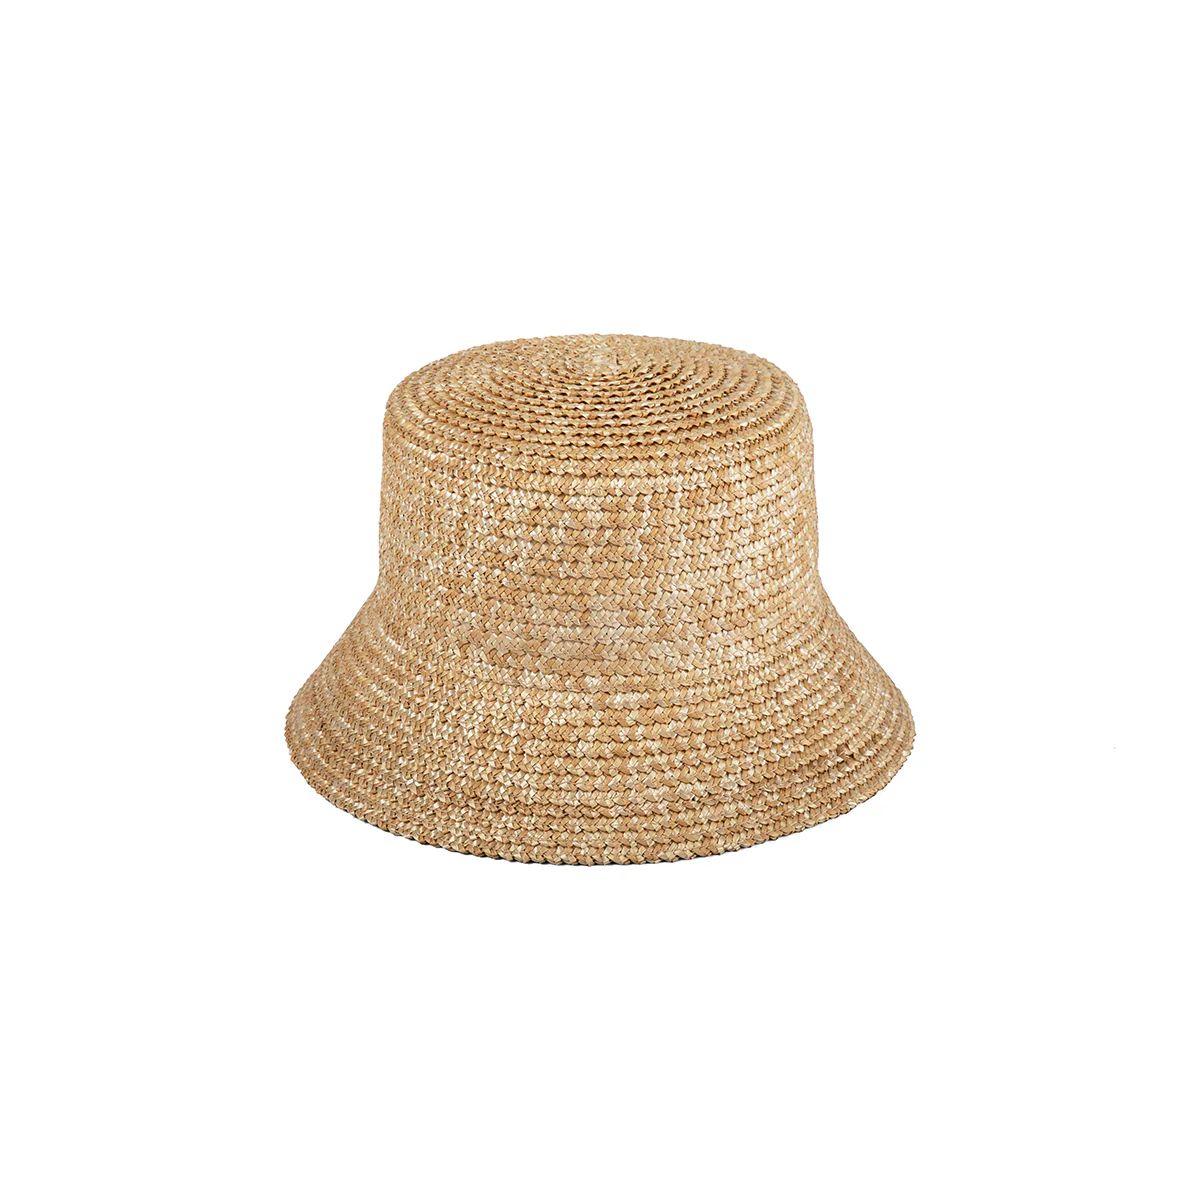 The Inca Bucket - Straw Bucket Hat in Natural | Lack of Color | Lack of Color